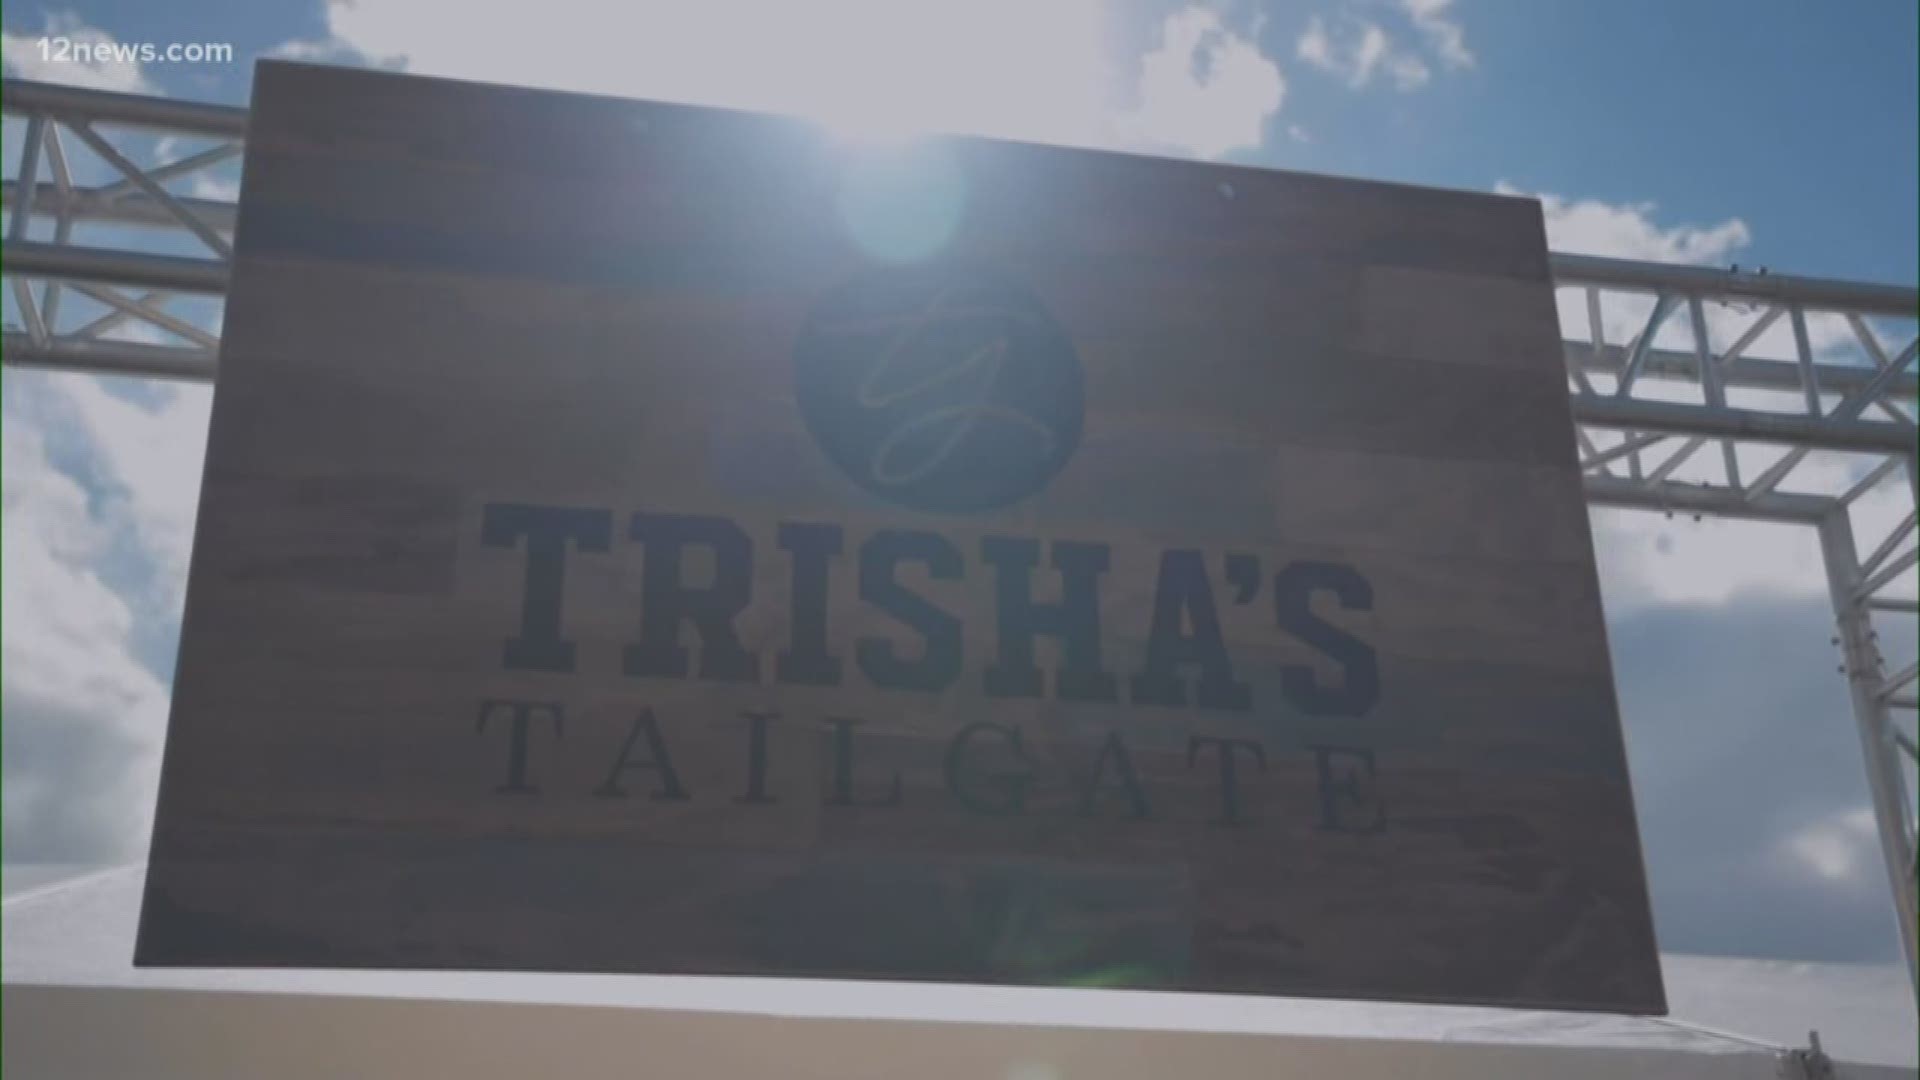 Garth Brooks is all set to perform at State Farm Stadium in Glendale this weekend. Ahead of the concert Trisha Yearwood, Garth's wife, is hosting a tailgate to get the party started.